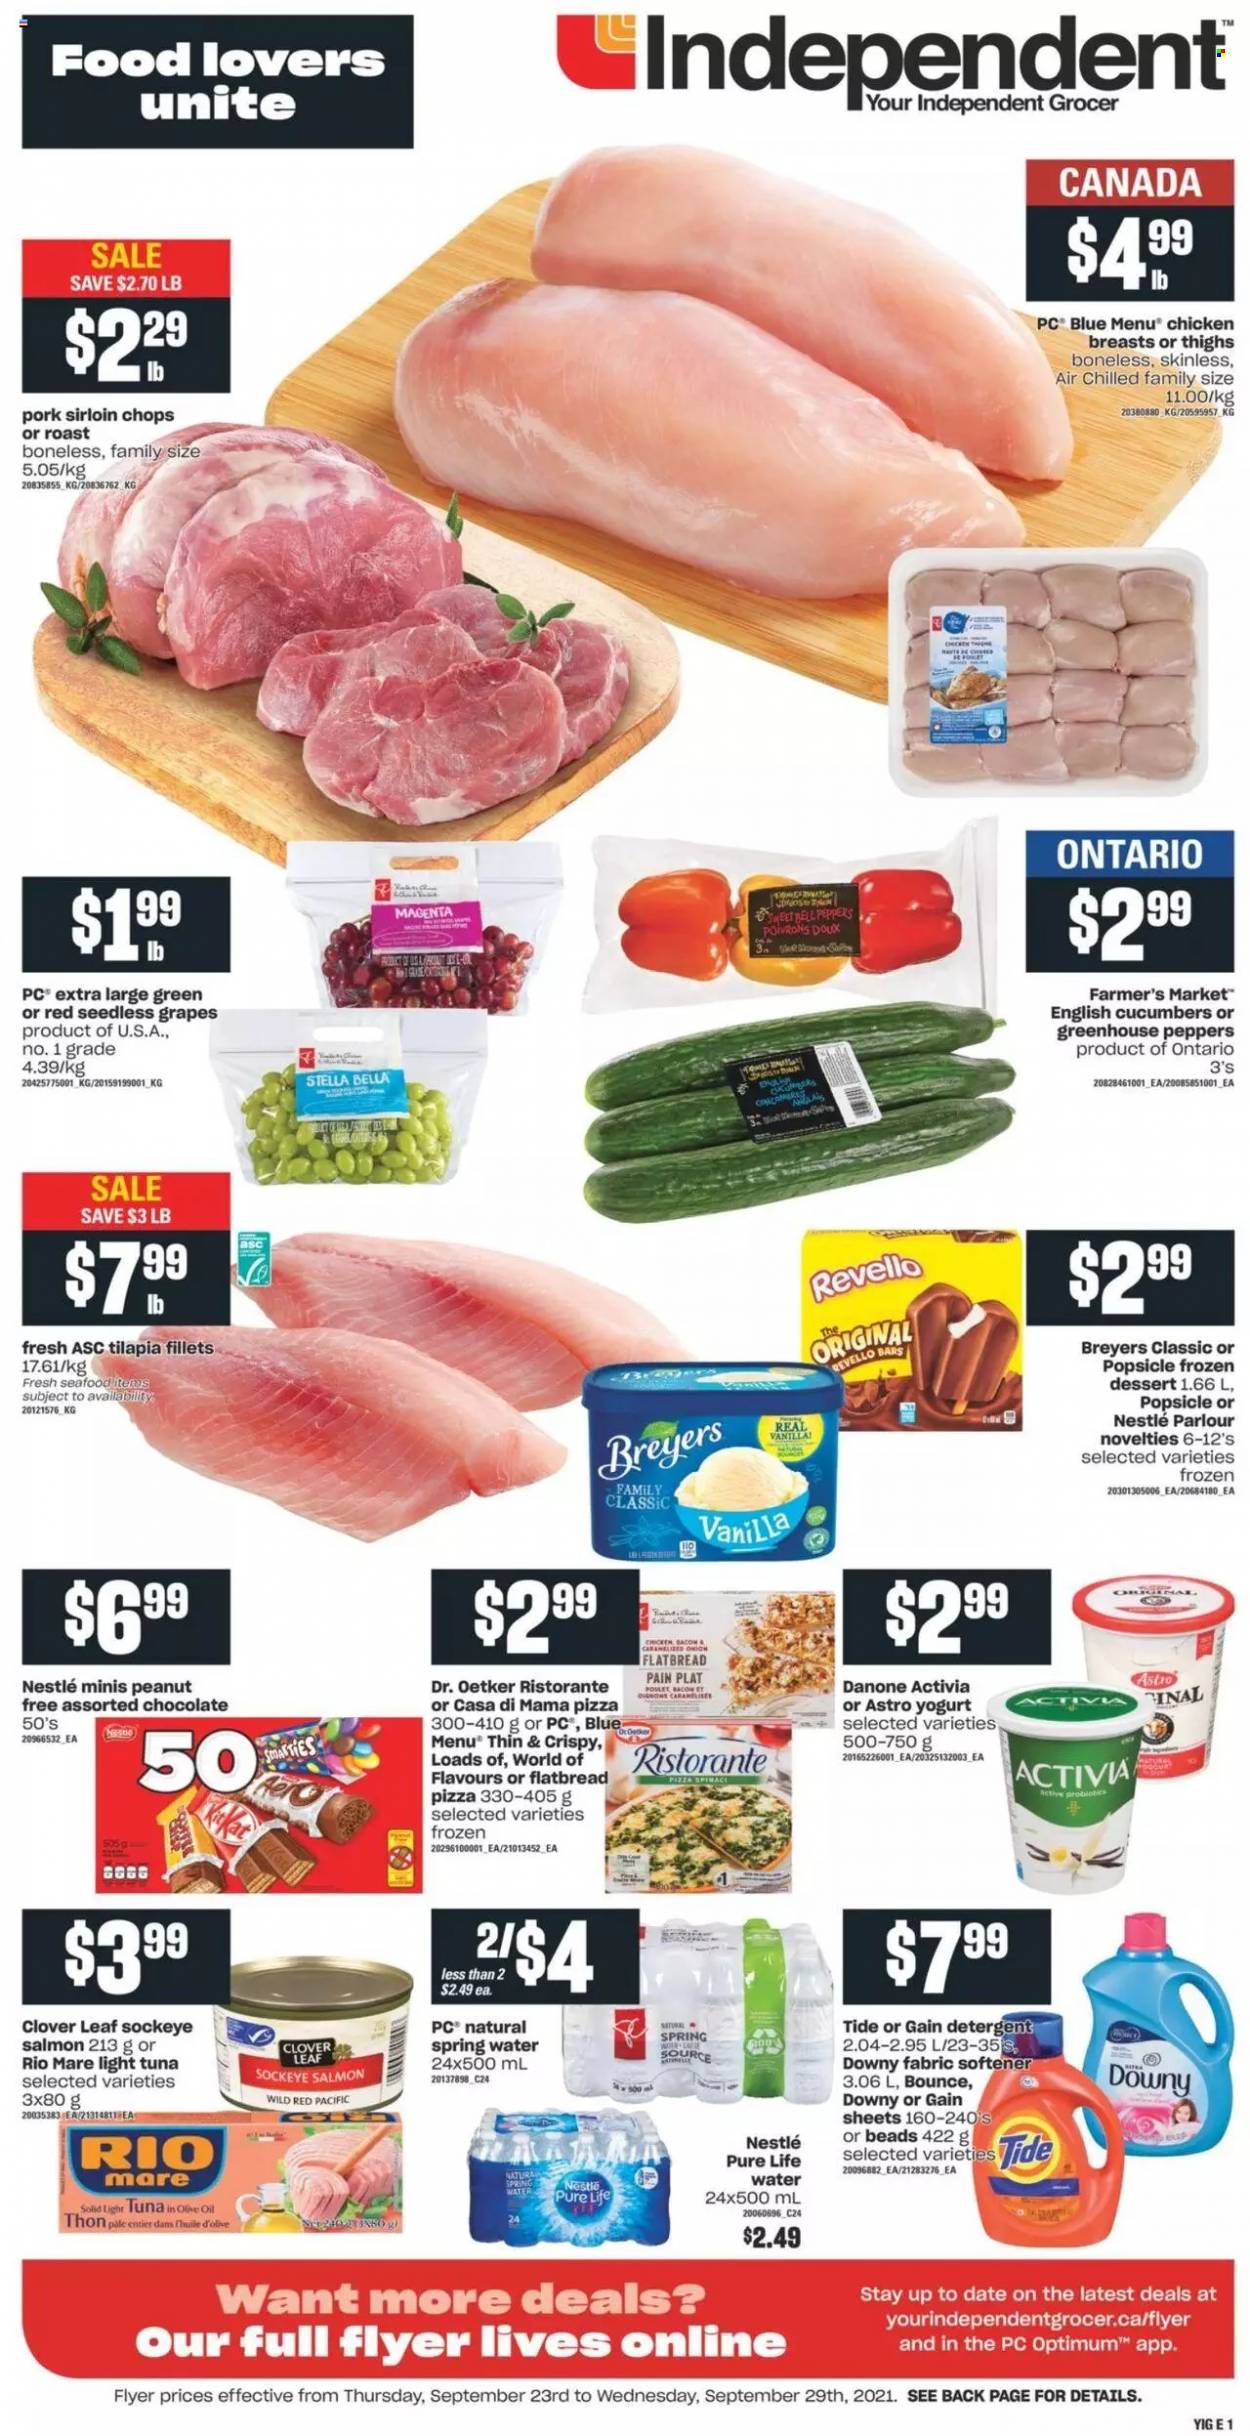 thumbnail - Independent Flyer - September 23, 2021 - September 29, 2021 - Sales products - flatbread, Bella, cucumber, peppers, grapes, seedless grapes, salmon, tilapia, tuna, seafood, pizza, Dr. Oetker, yoghurt, Clover, Activia, chocolate, light tuna, oil, spring water, Pure Life Water, chicken breasts, pork loin, Gain, Tide, fabric softener, Bounce, Downy Laundry, Optimum, probiotics, Danone, Nestlé, detergent. Page 1.